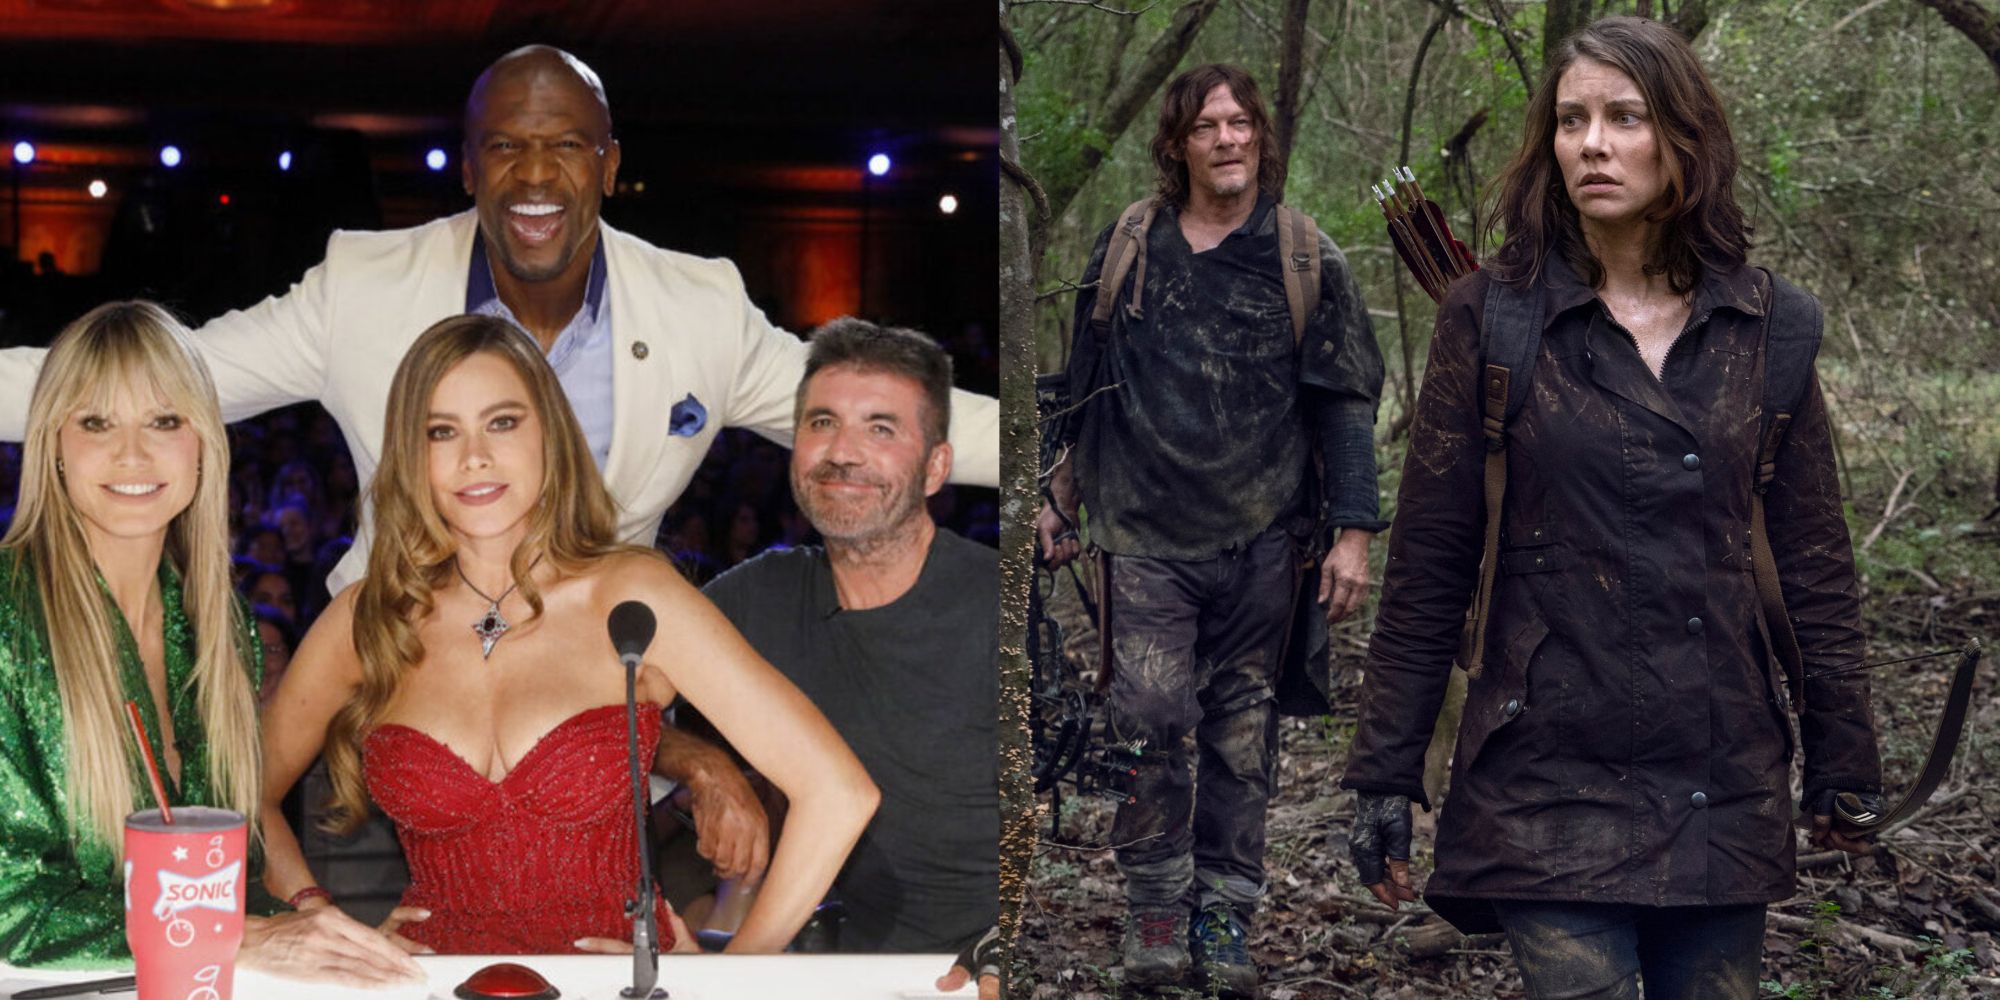 Split images of the judges in America's Got Talent and Maggie and Daryl in The Walking Dead